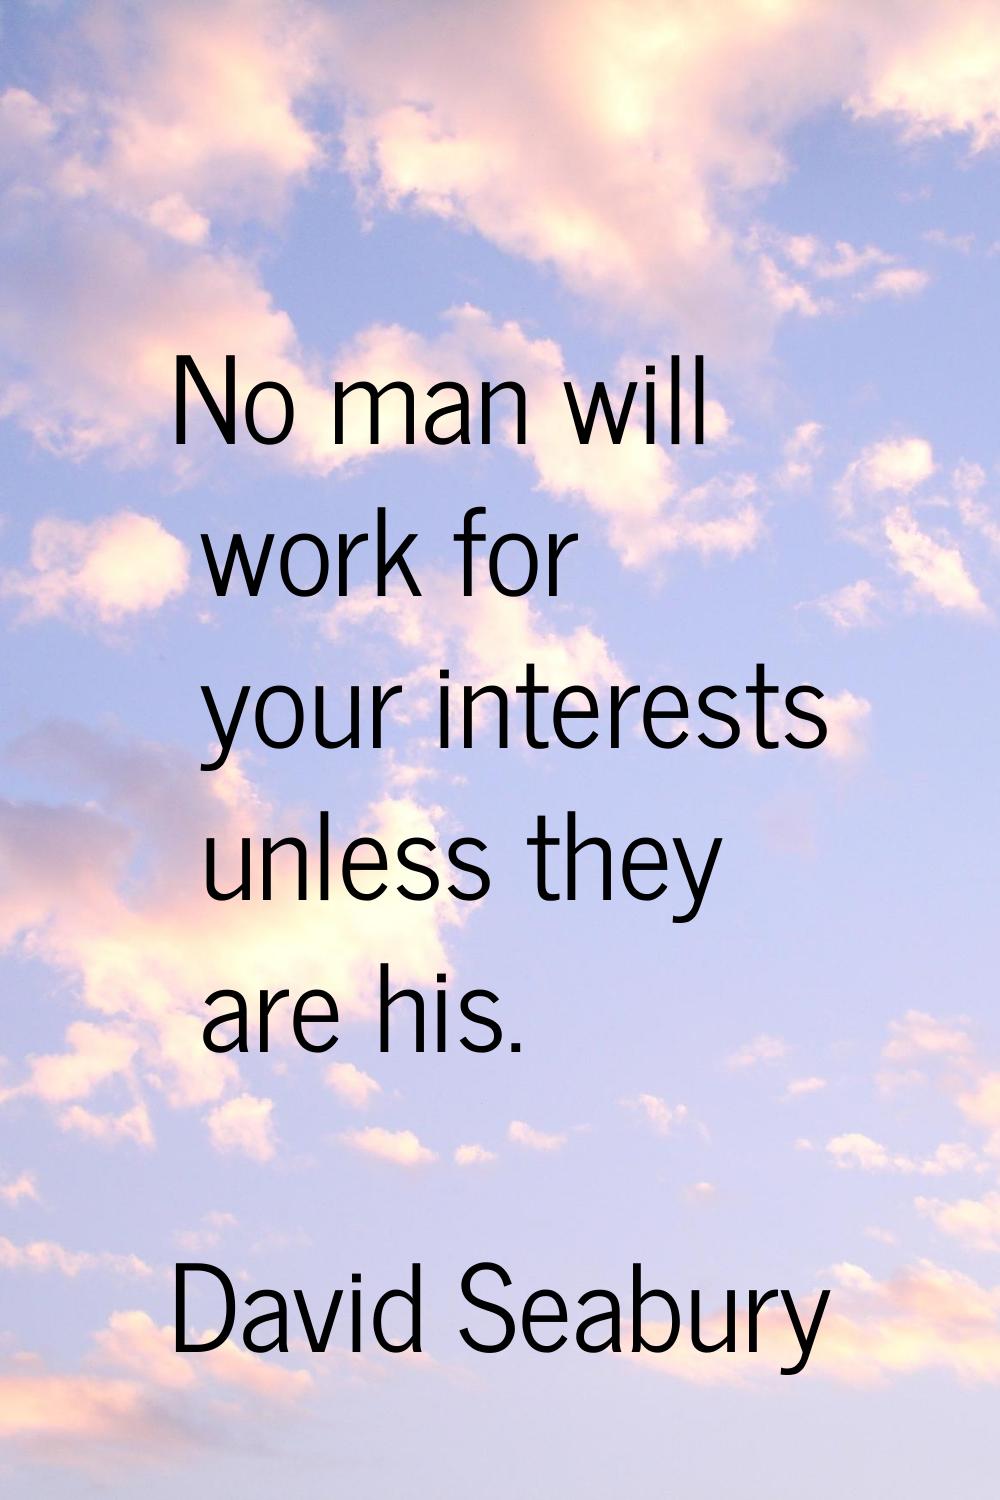 No man will work for your interests unless they are his.